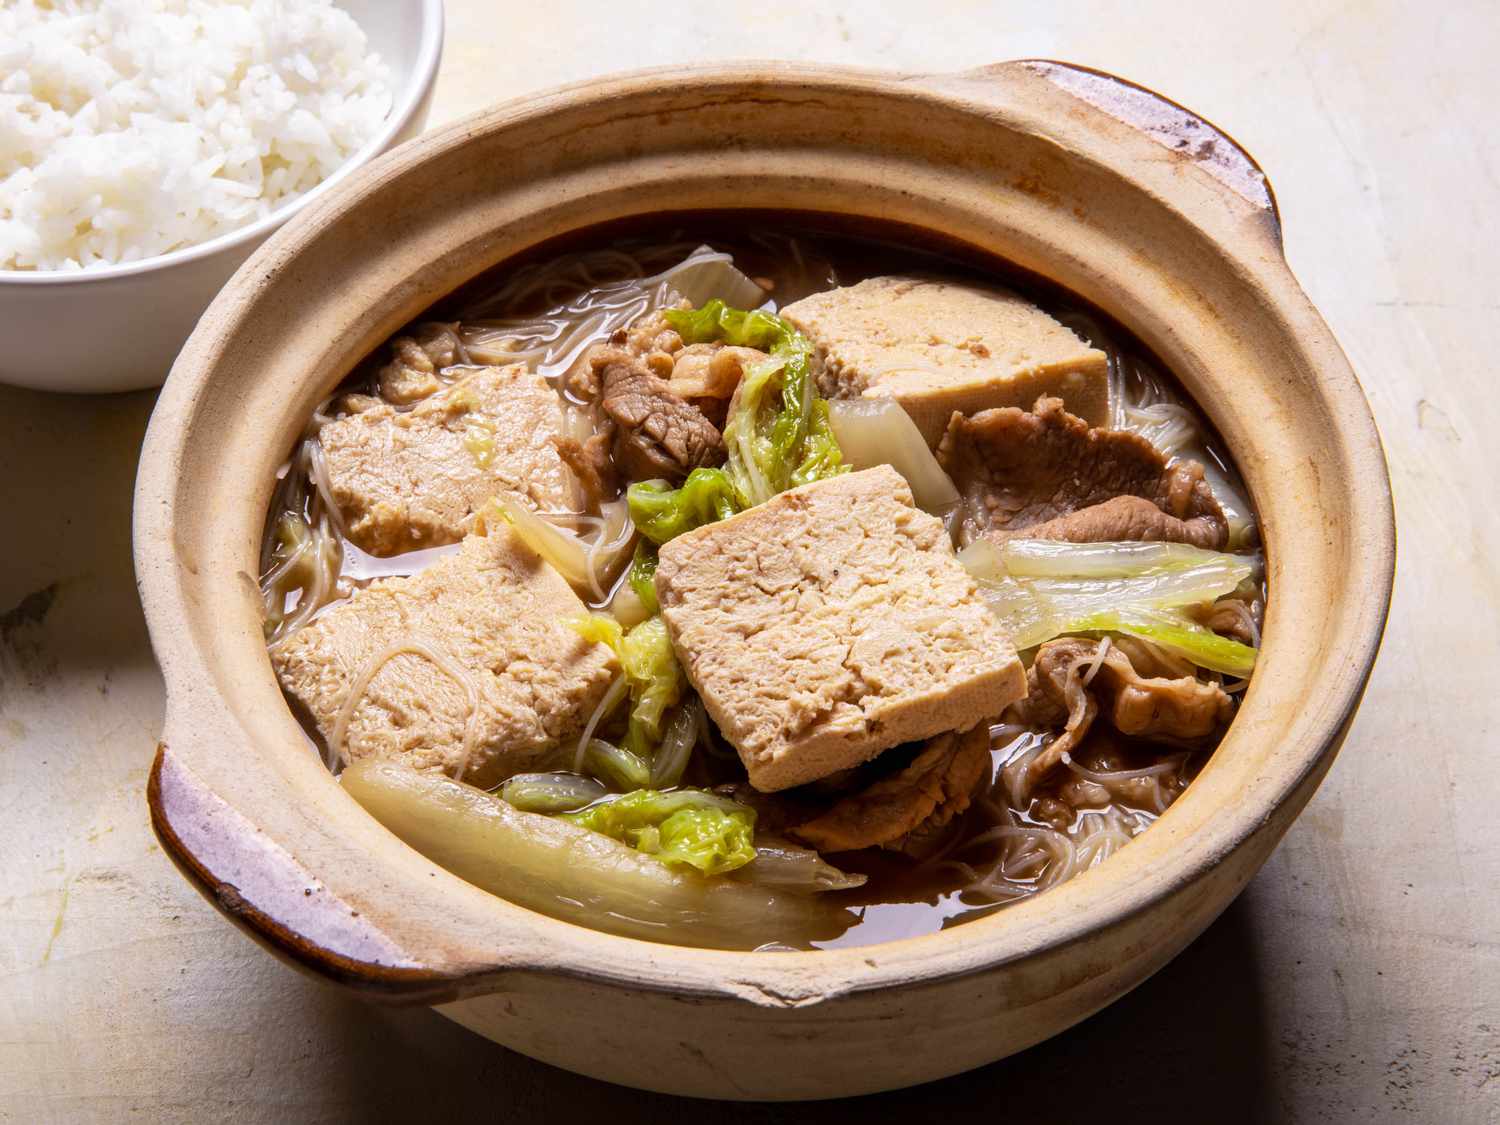 Serving bowl of Frozen Simmered Tofu Soup with Pork, Cabbage, and Rice Noodles with rice alongside